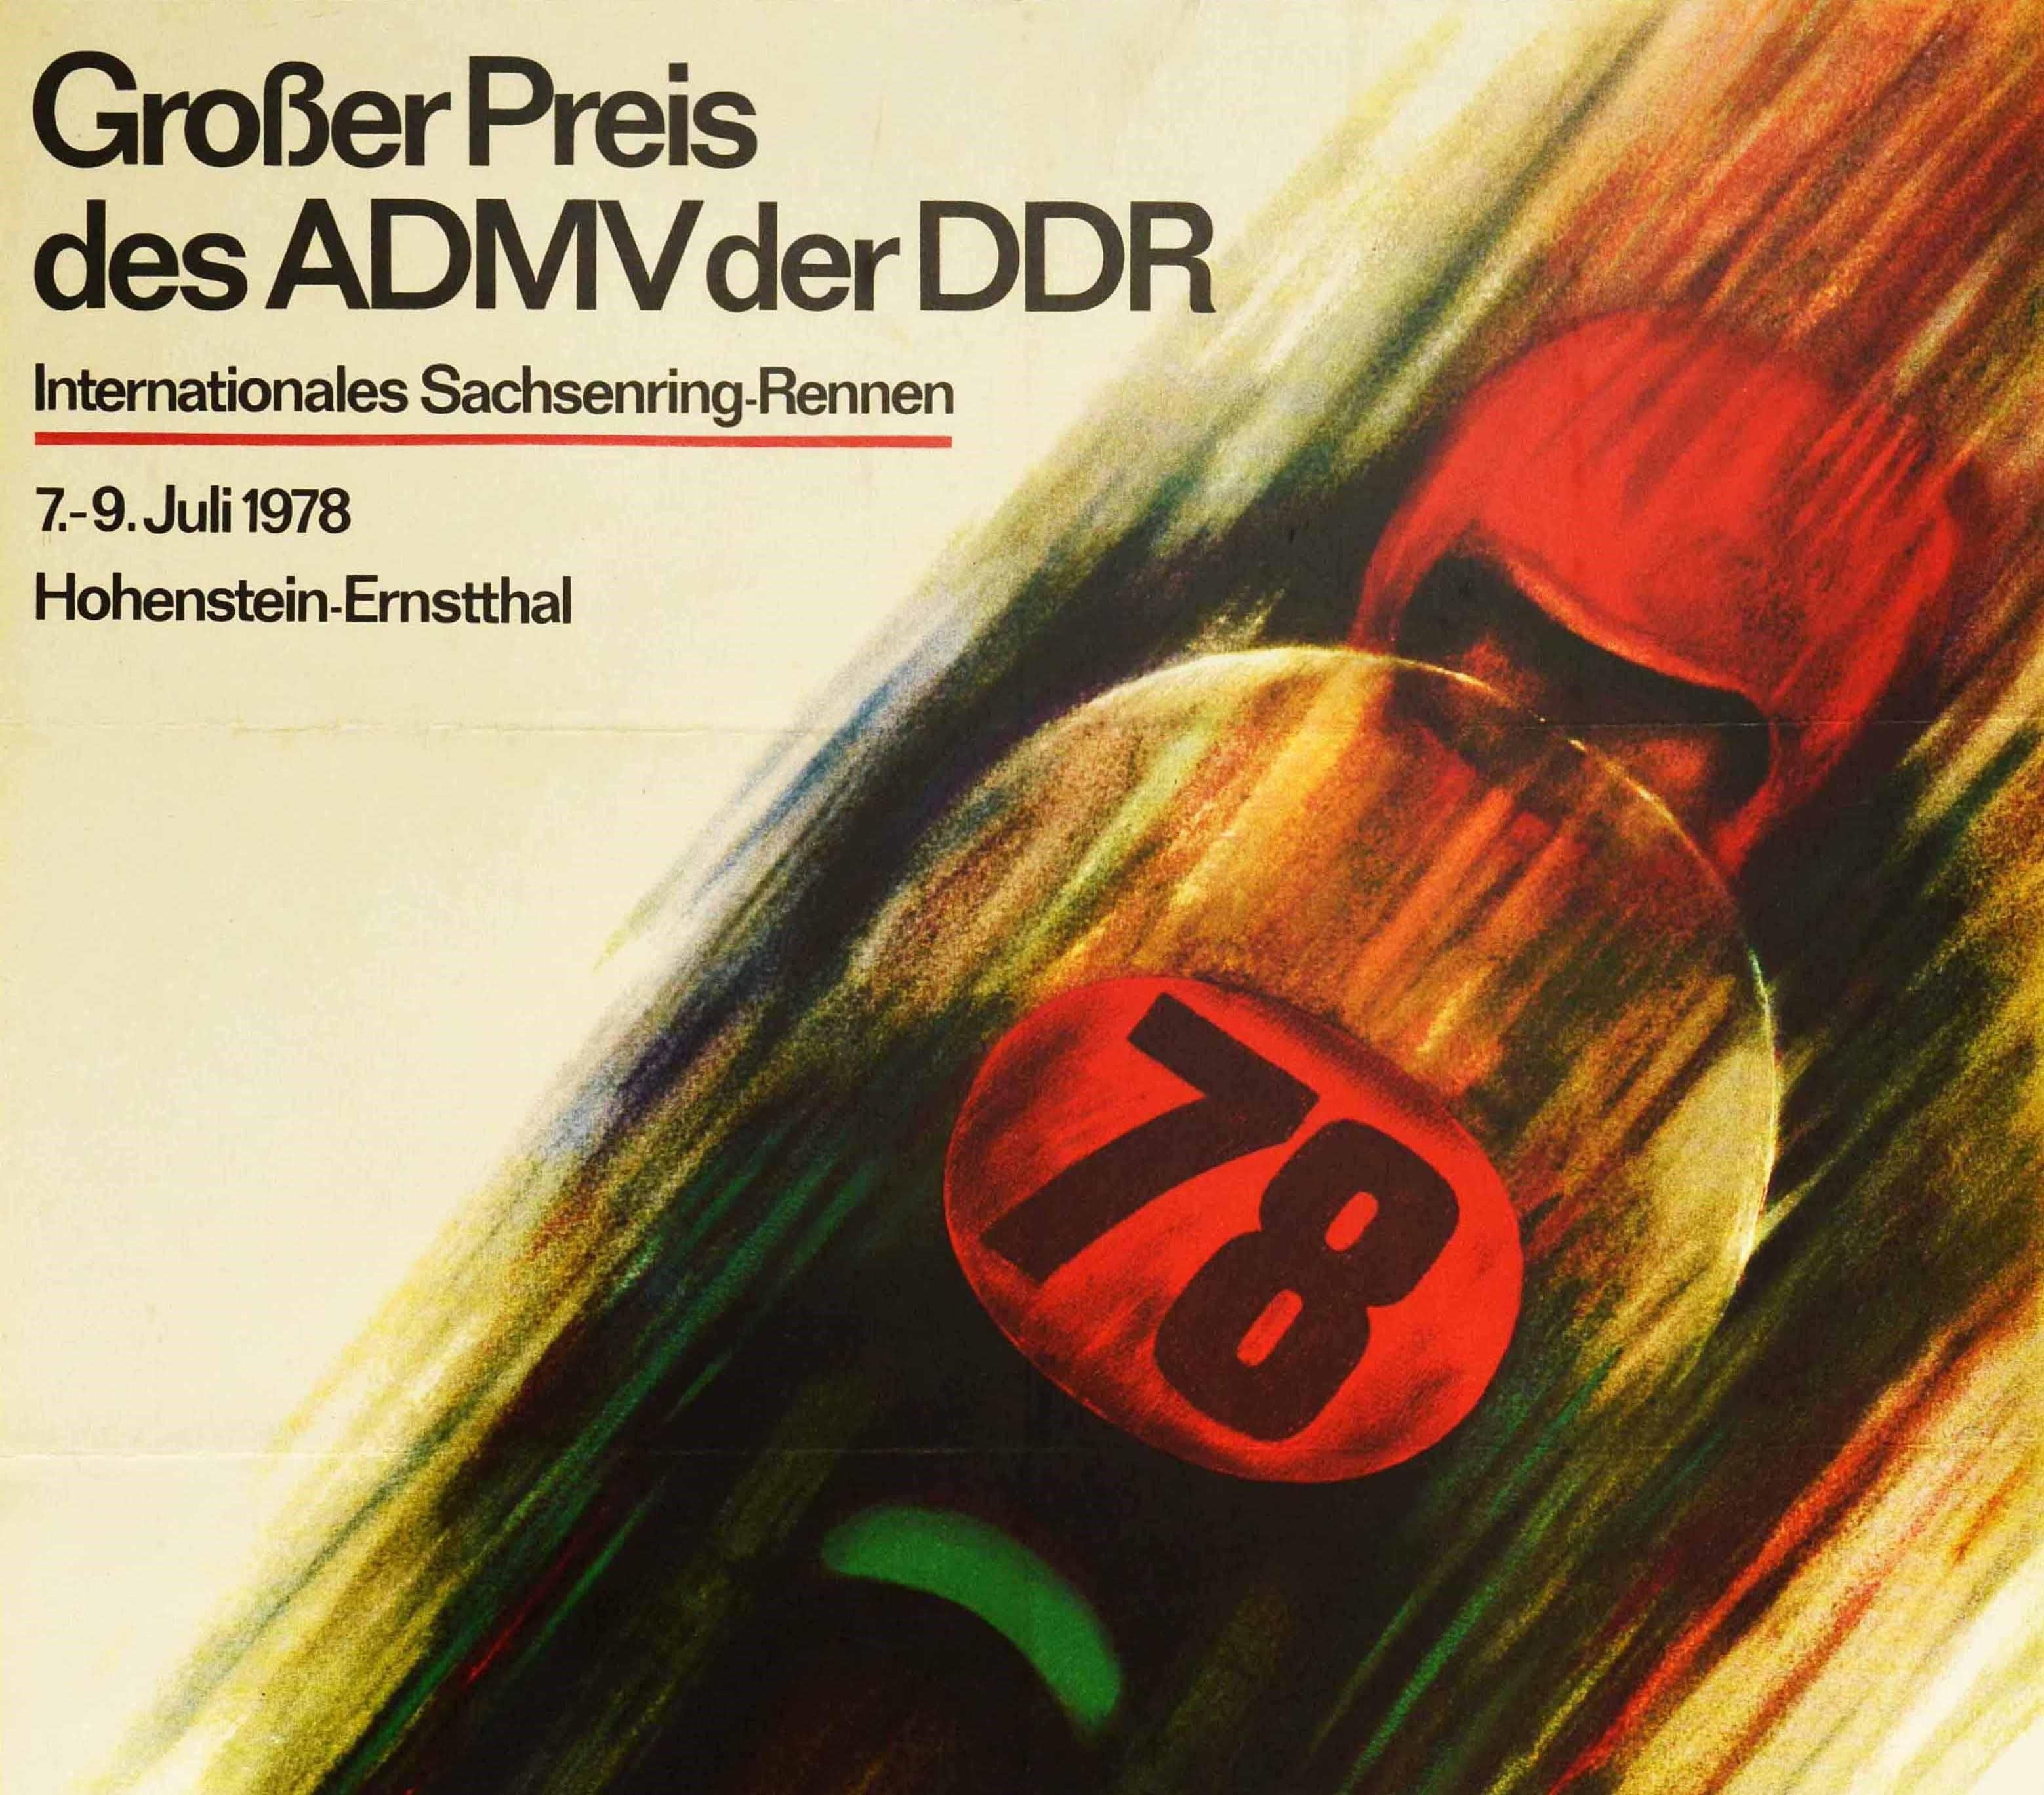 Original vintage sport poster advertising the ADM Grand Prix Race of the German Democratic Republic held at the Hohenstein-Ernstthal Sachsenring motorsport racing circuit on 7-9 July 1978 featuring a great illustration of a speeding motorcycle